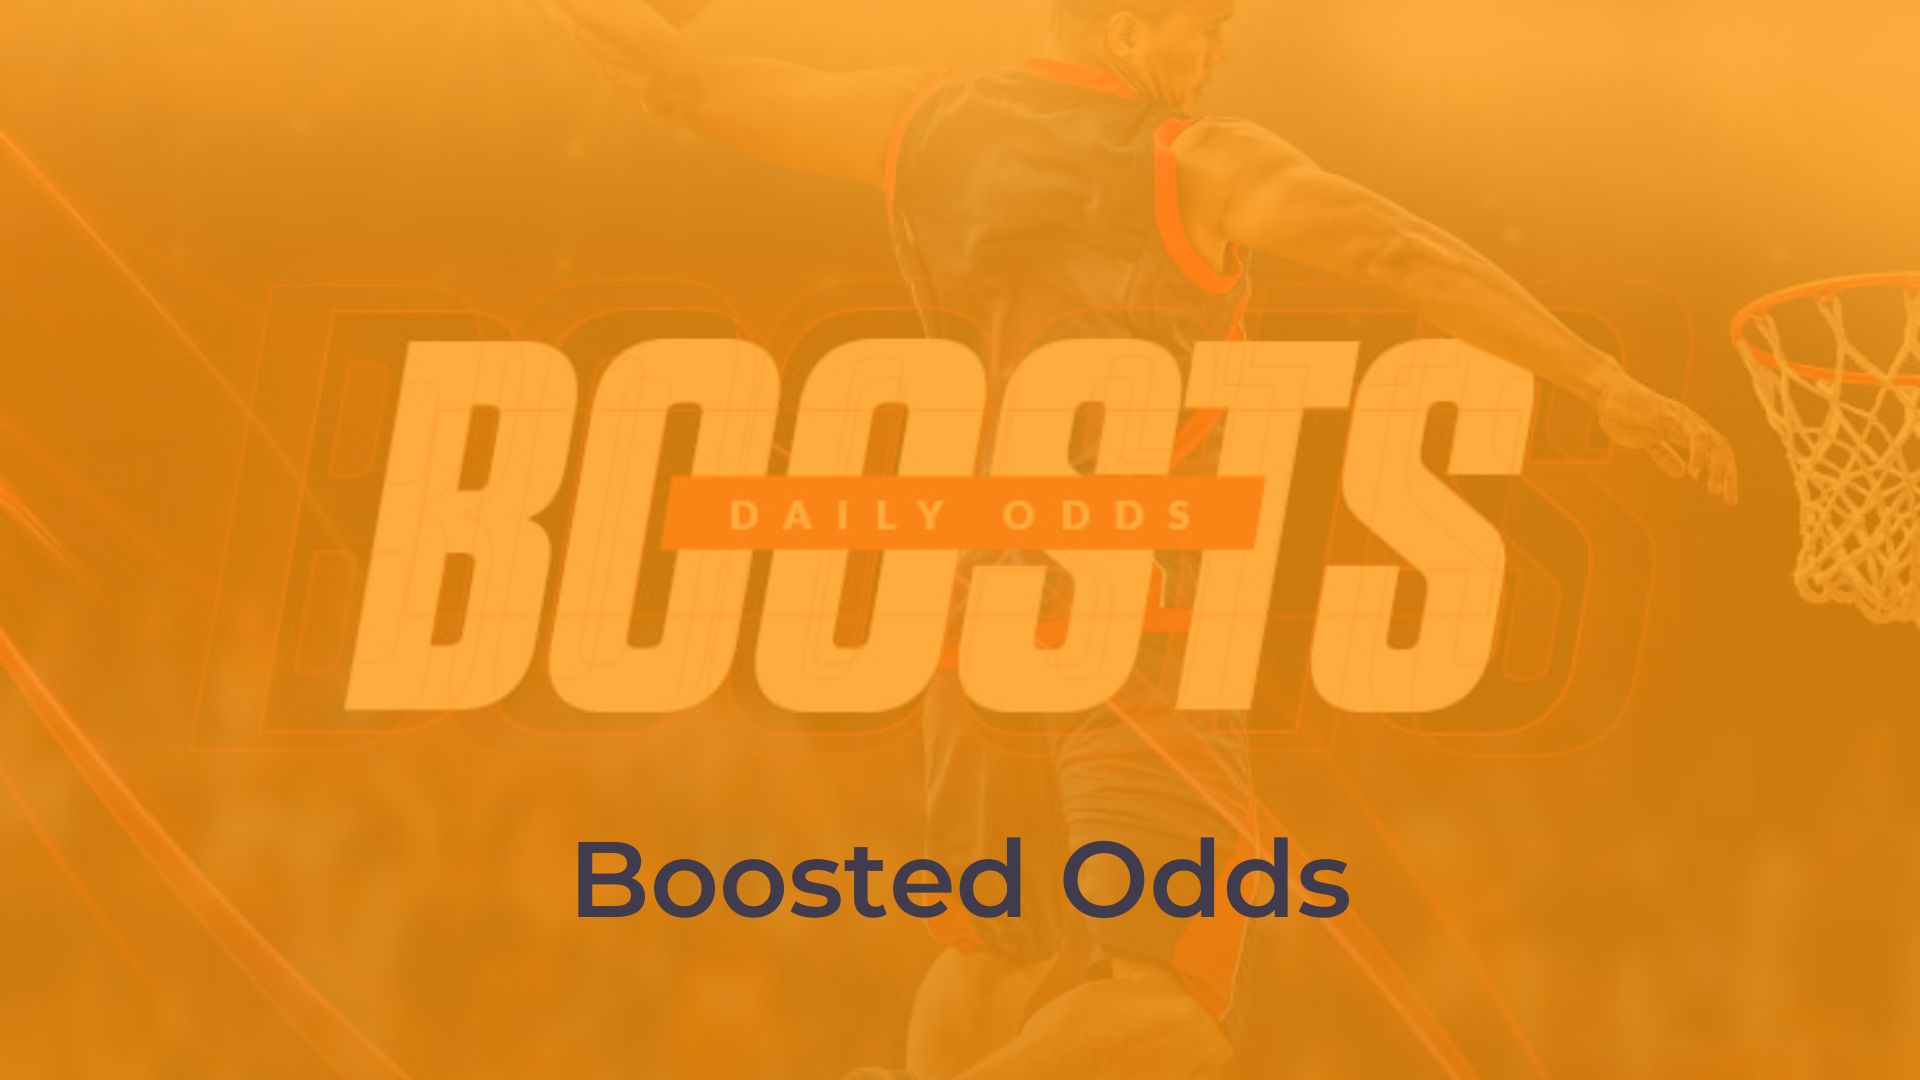 Understanding Boosted Odds